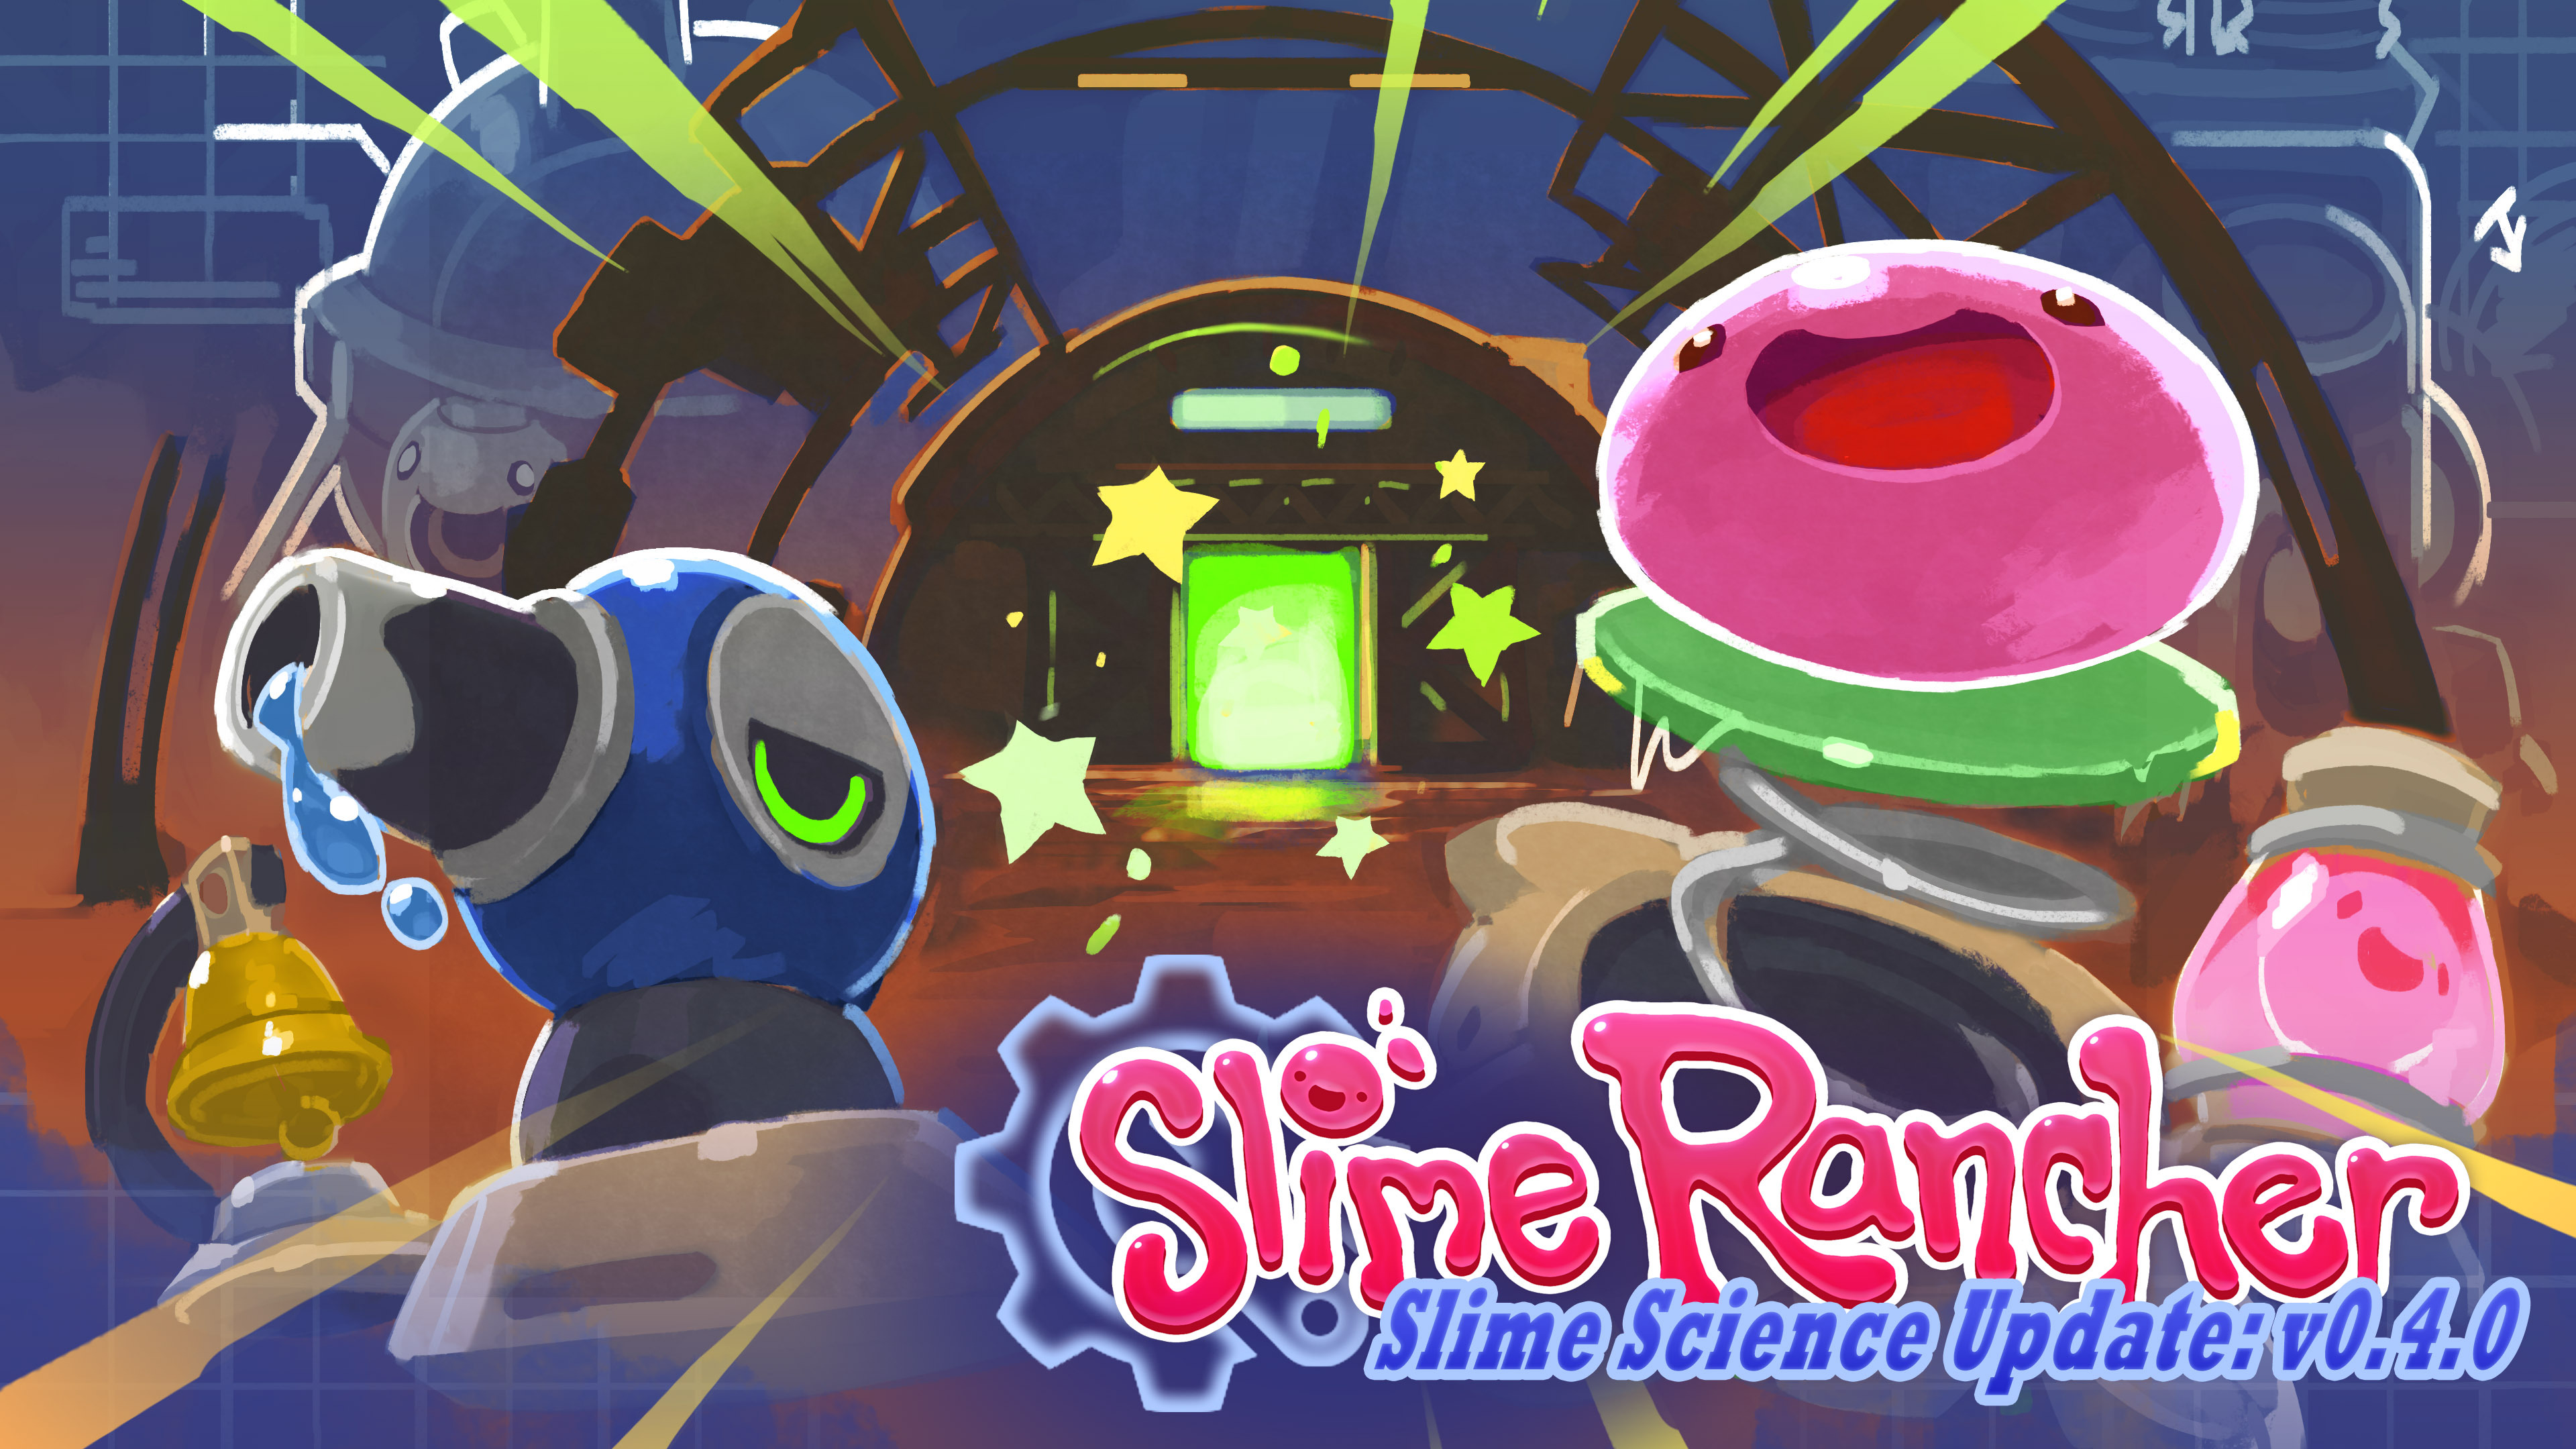 download free slime rancher nintendo switch